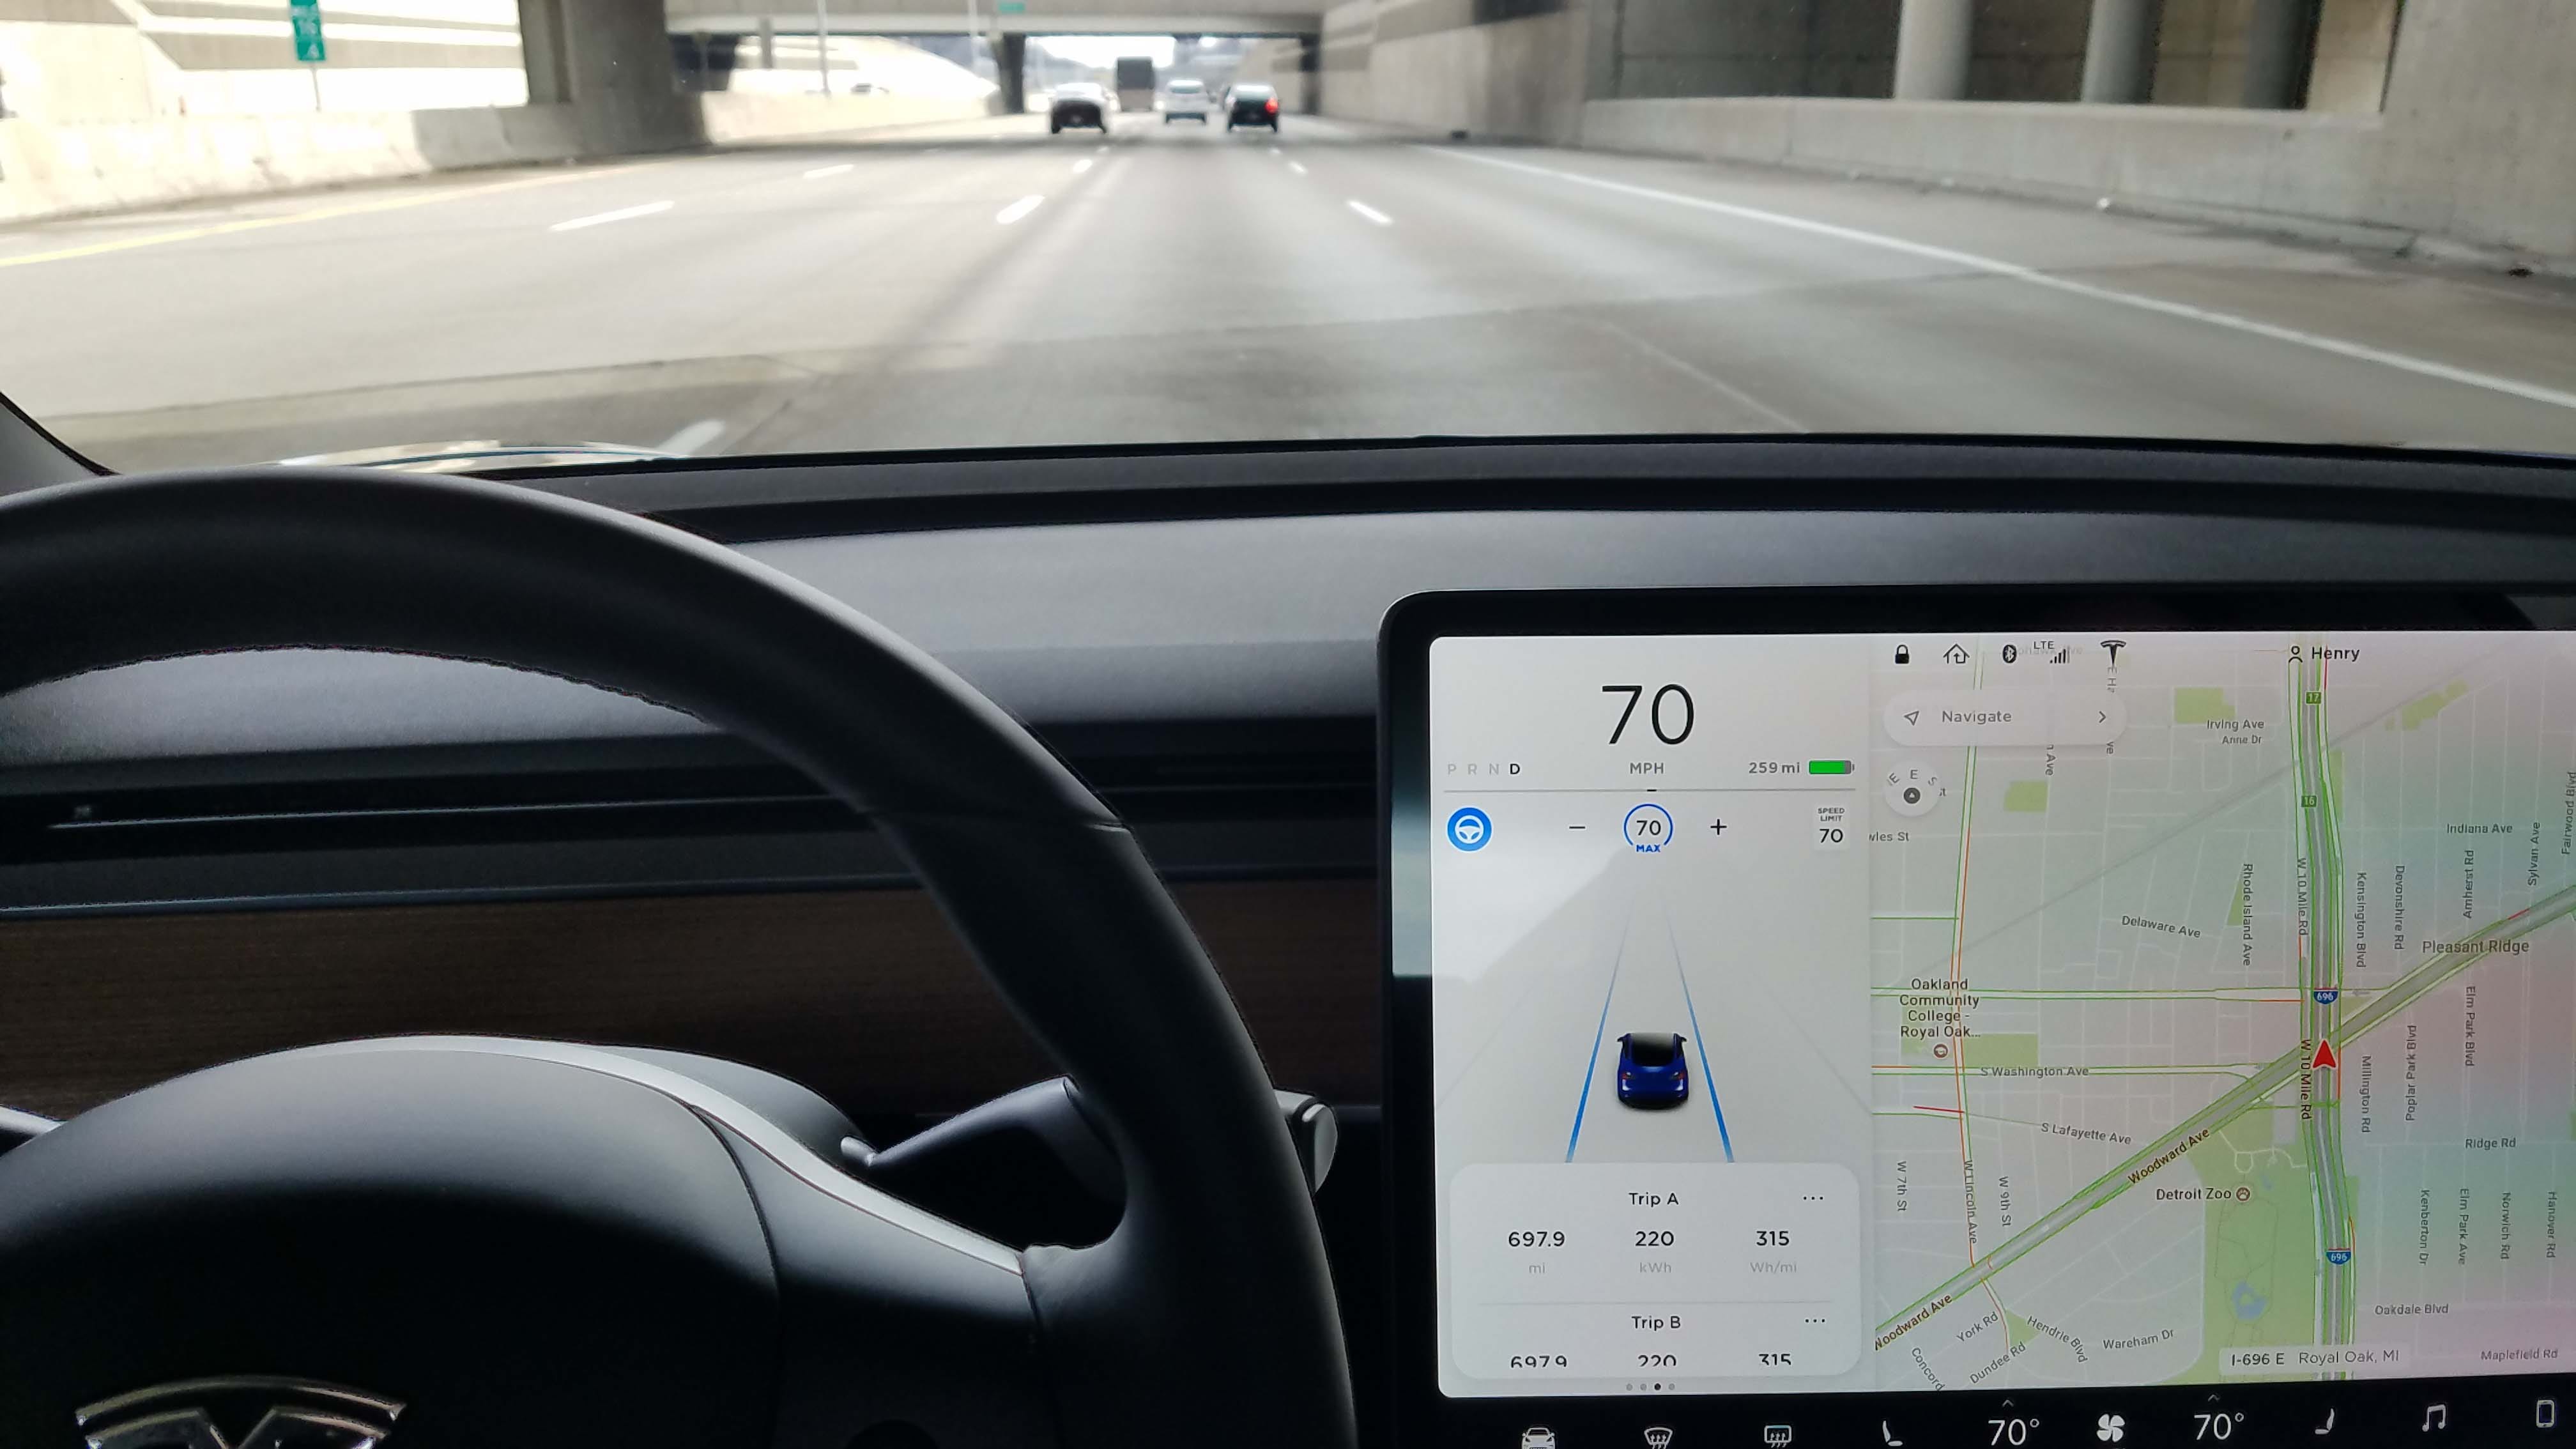 Self-driving Auto Pilot comes as an option of the Tesla Model 3. Push the steering wheel button on the northwest corner of the display, it turns blue, and the car takes over.